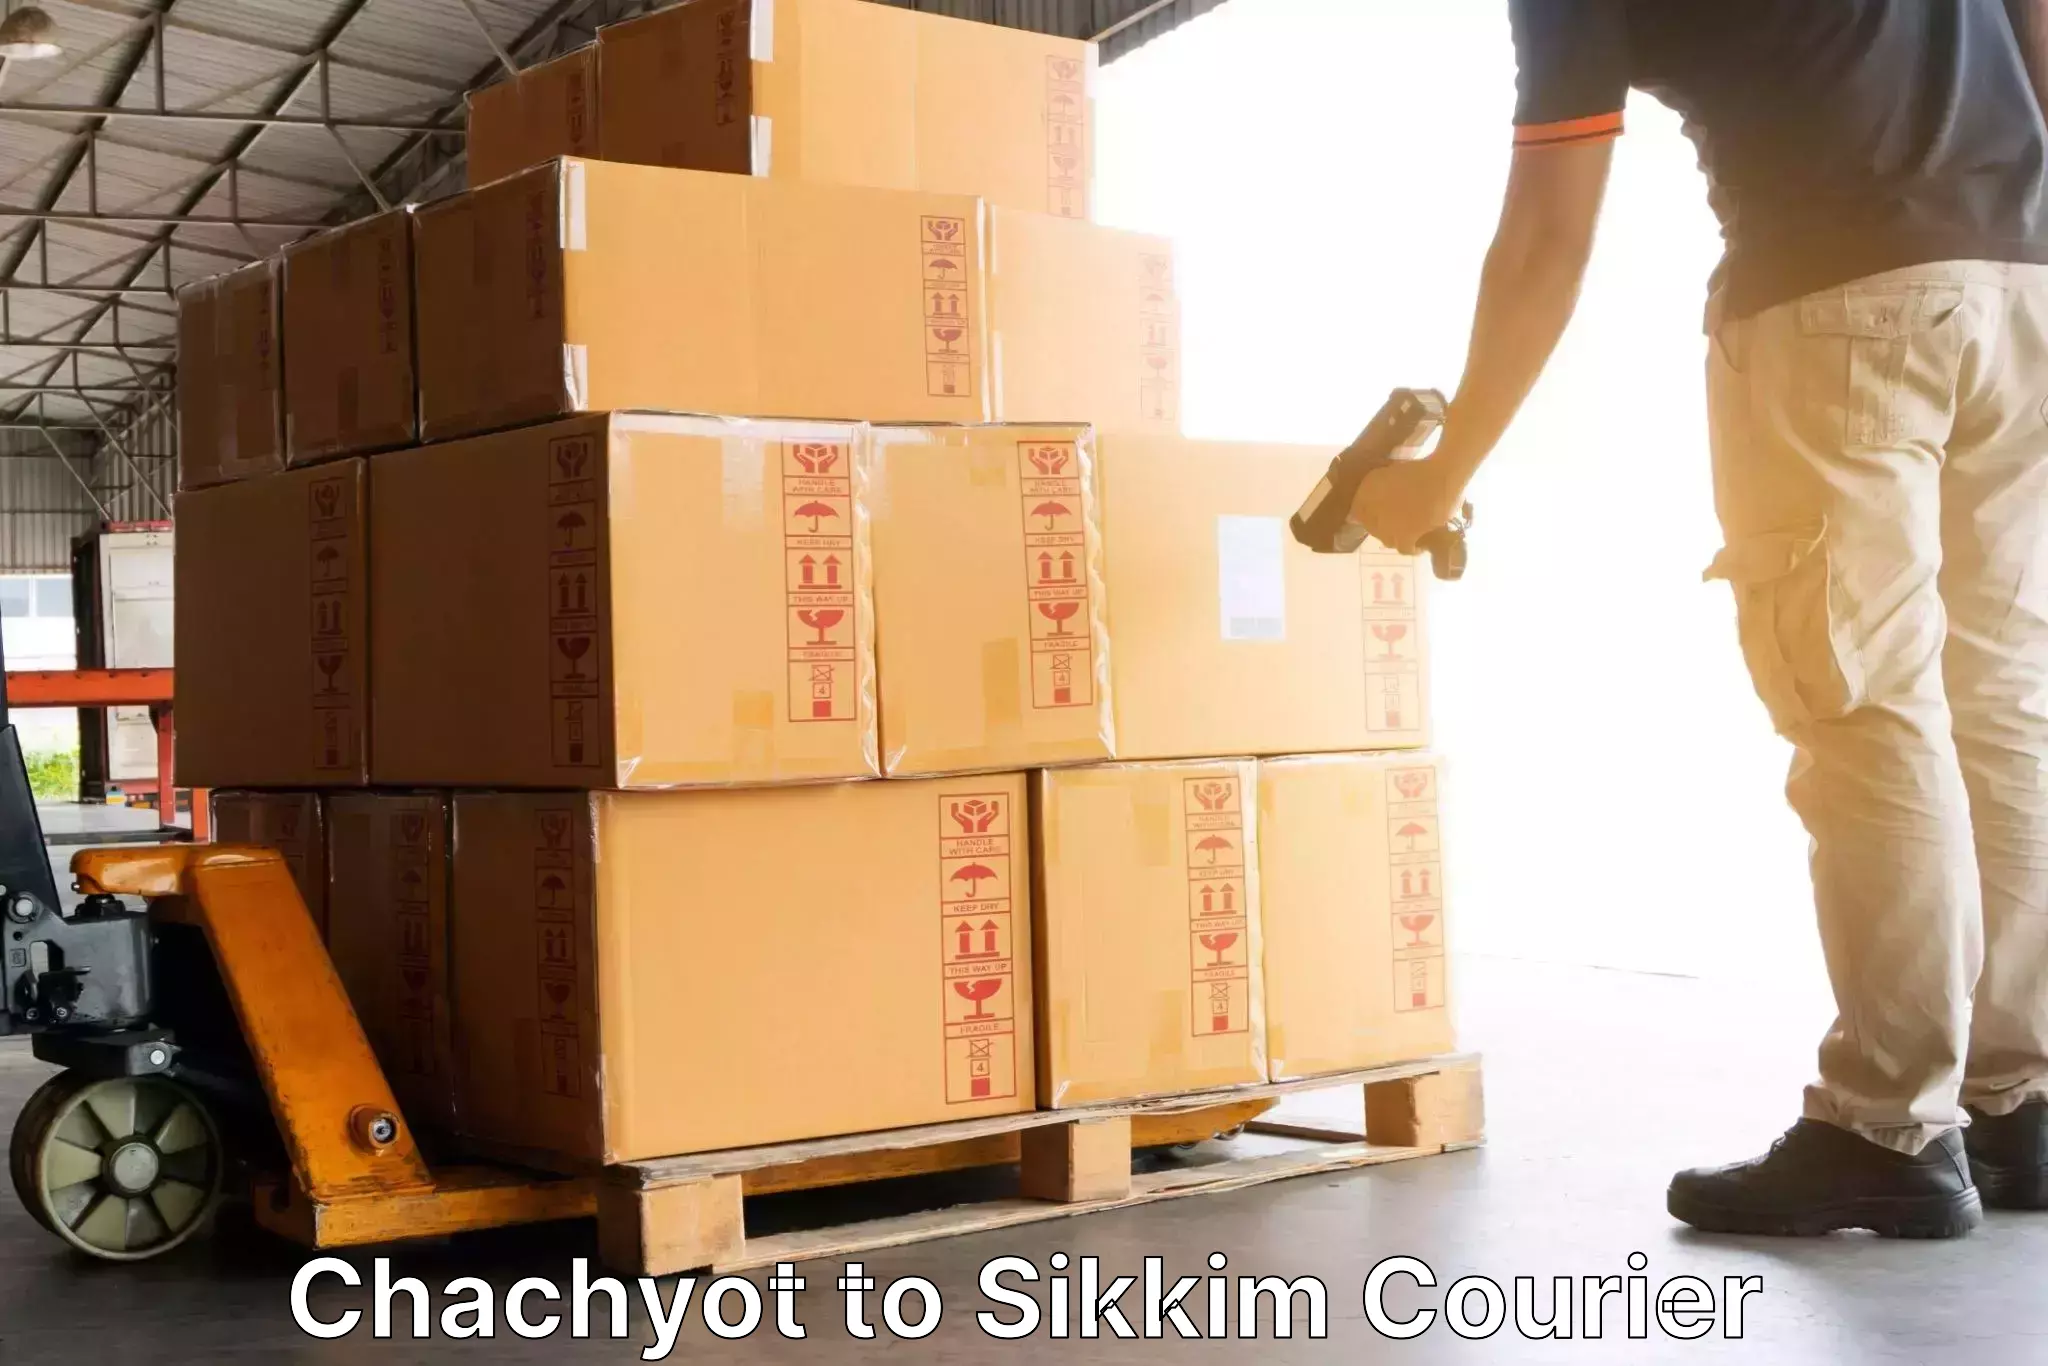 Efficient freight service Chachyot to Mangan